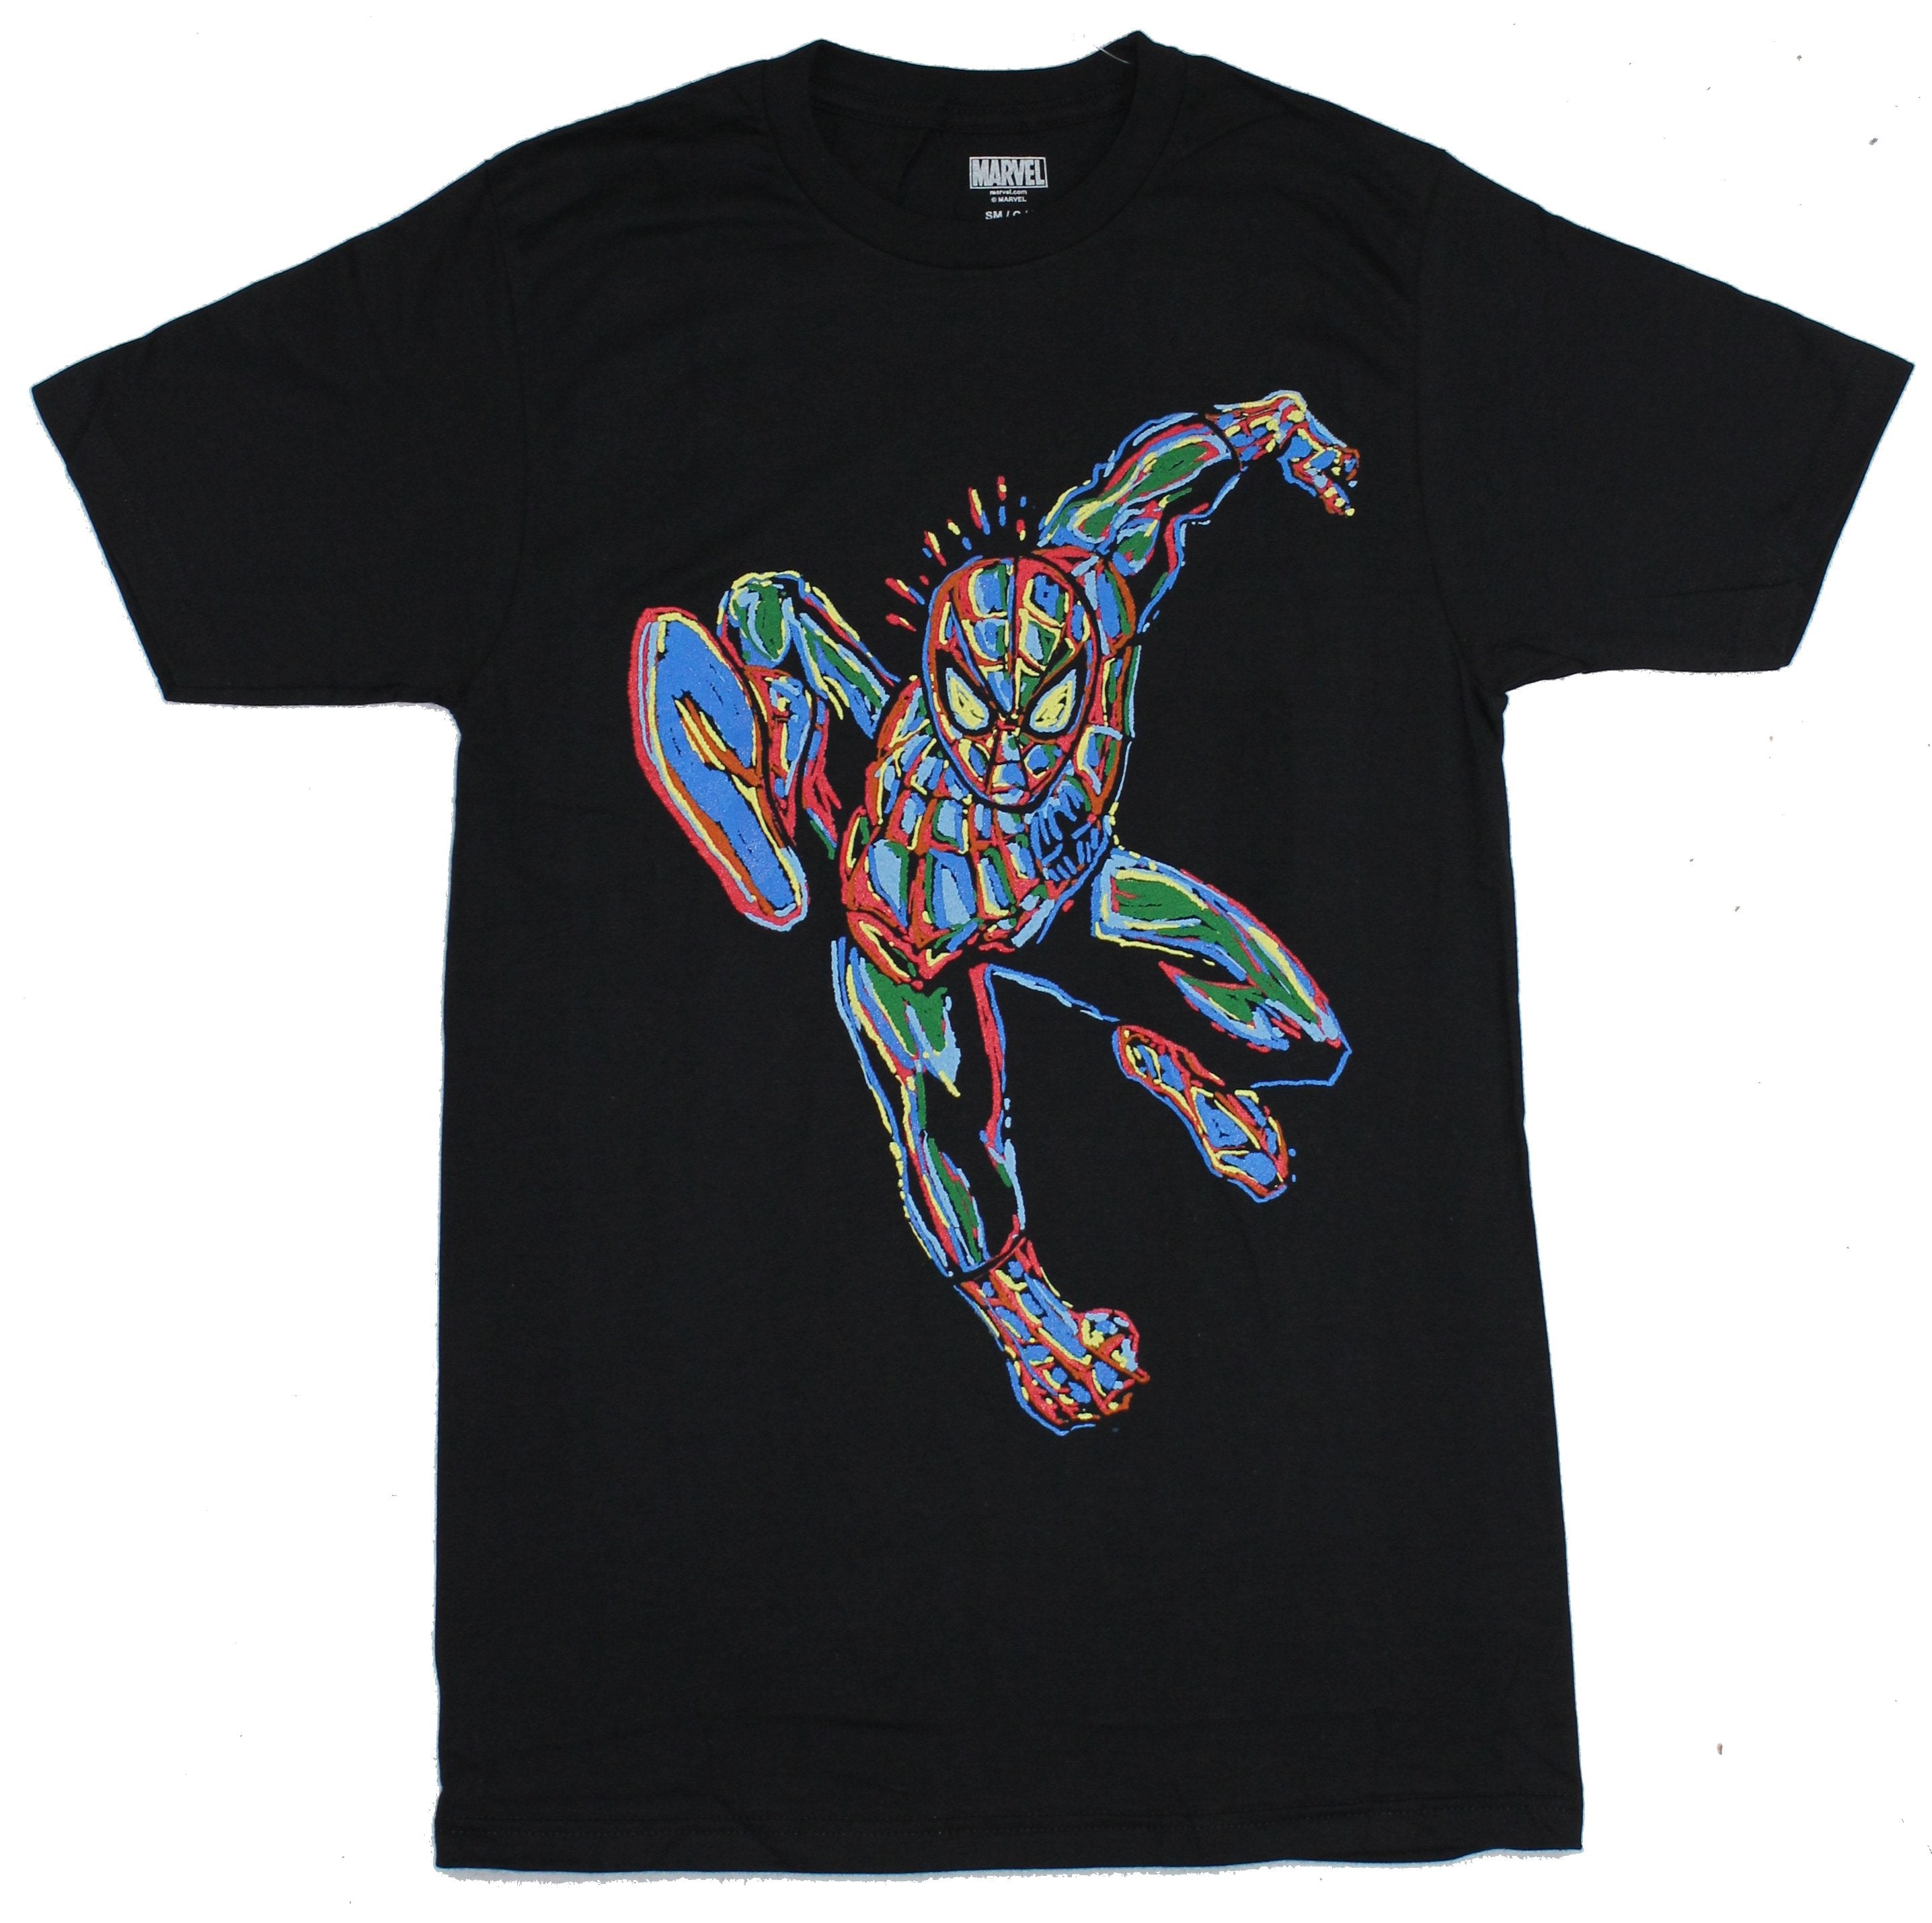 Spider-man (Marvel) Mens T-Shirt - Colorful abstract Swing Spidey Image